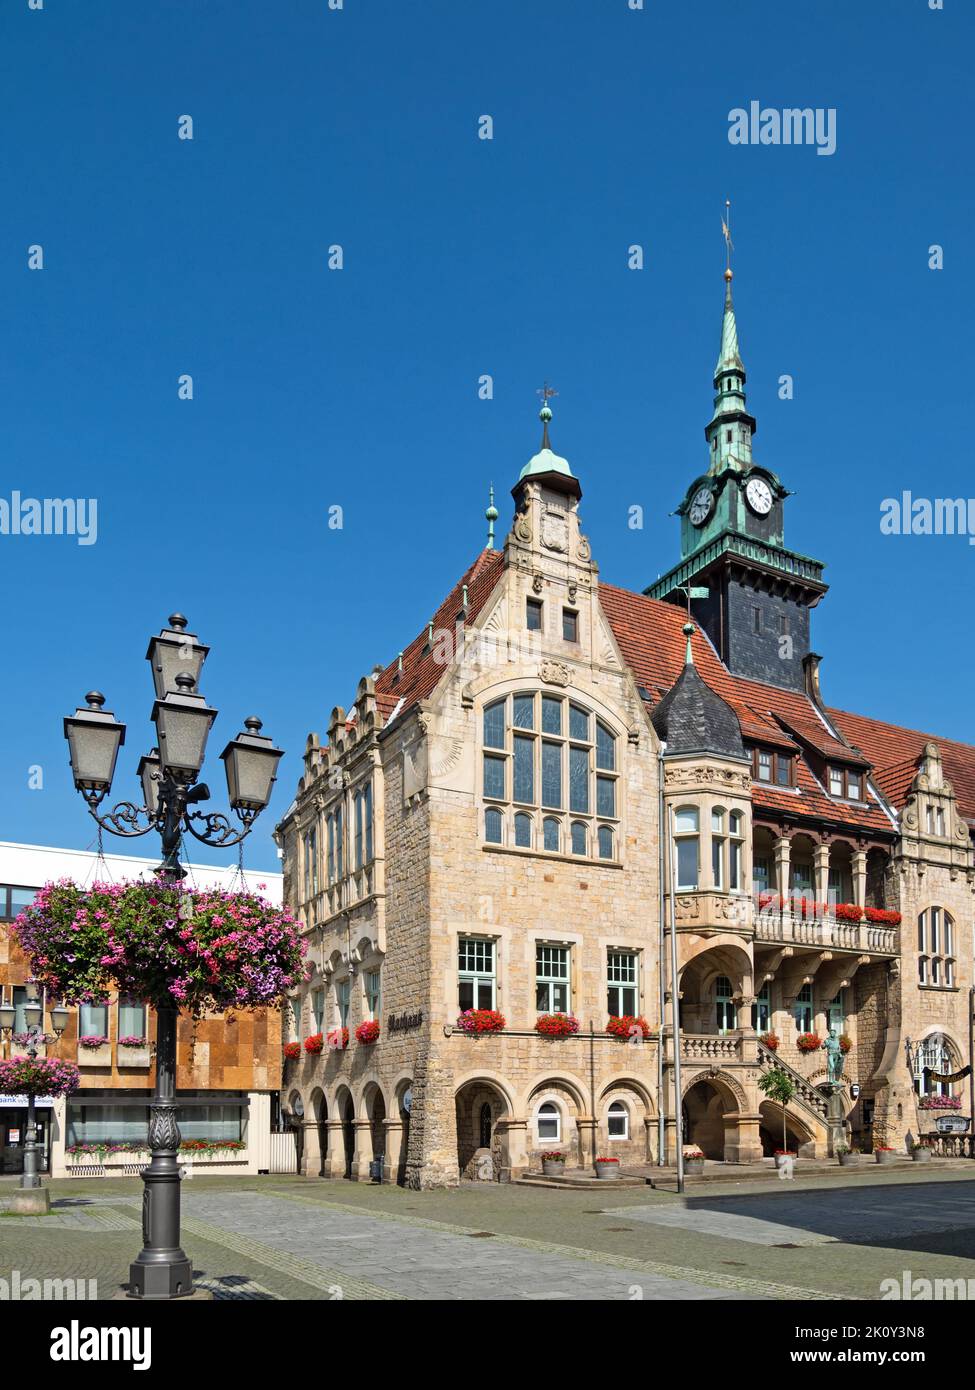 Bückeburg, Lower Saxony, Germany - 17 July 2021: Exterior view of the town hall of the city of Bückeburg, located on the market square. Stock Photo